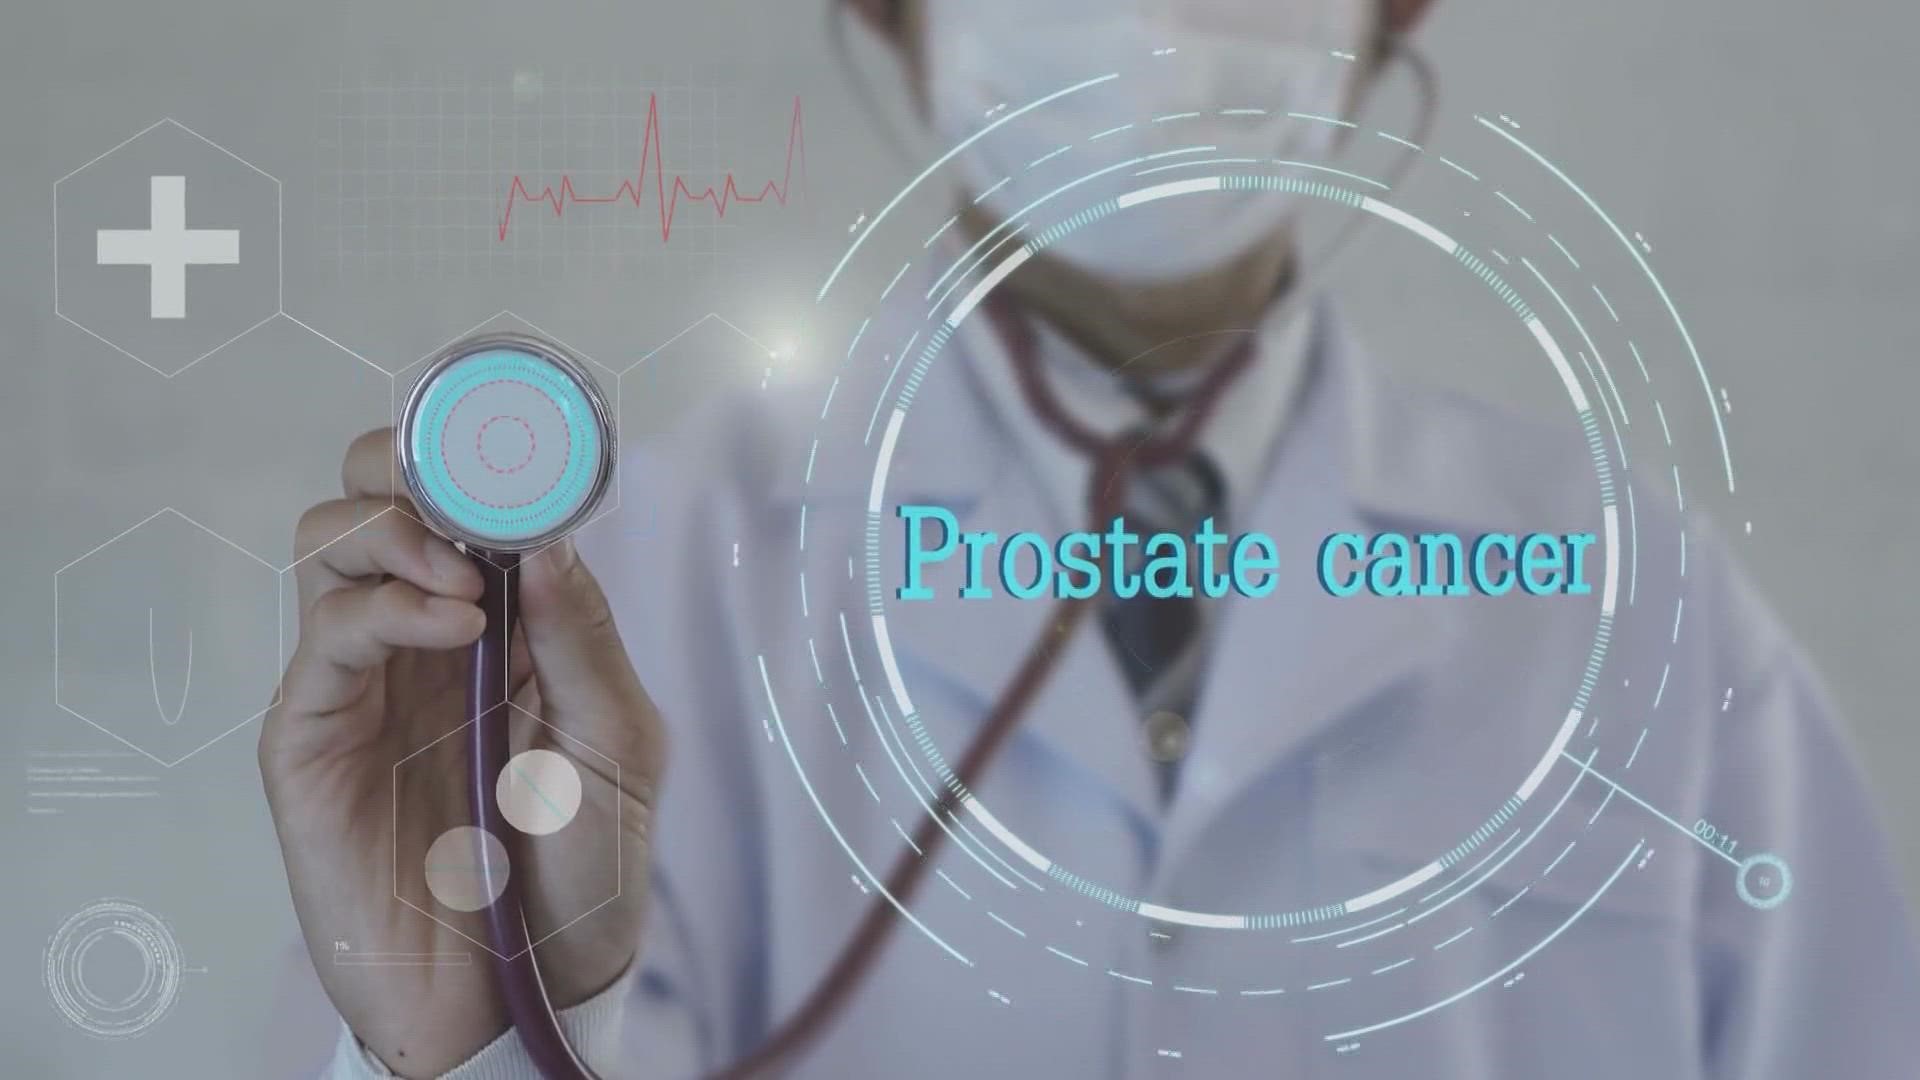 September is Prostate Cancer Awareness Month. The earlier you catch the disease, the better the outcome may be.